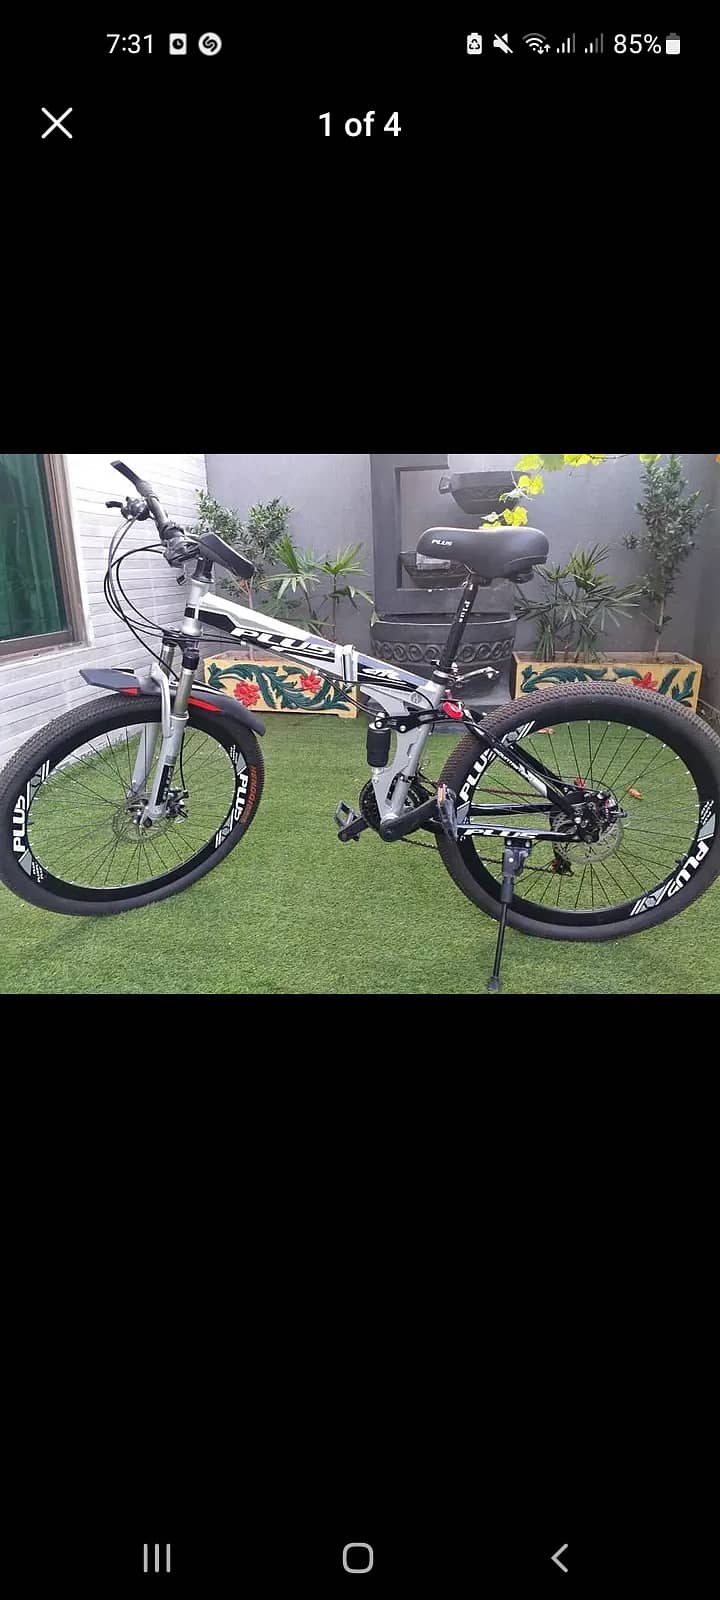 Plus mtb cycle imported from china 7